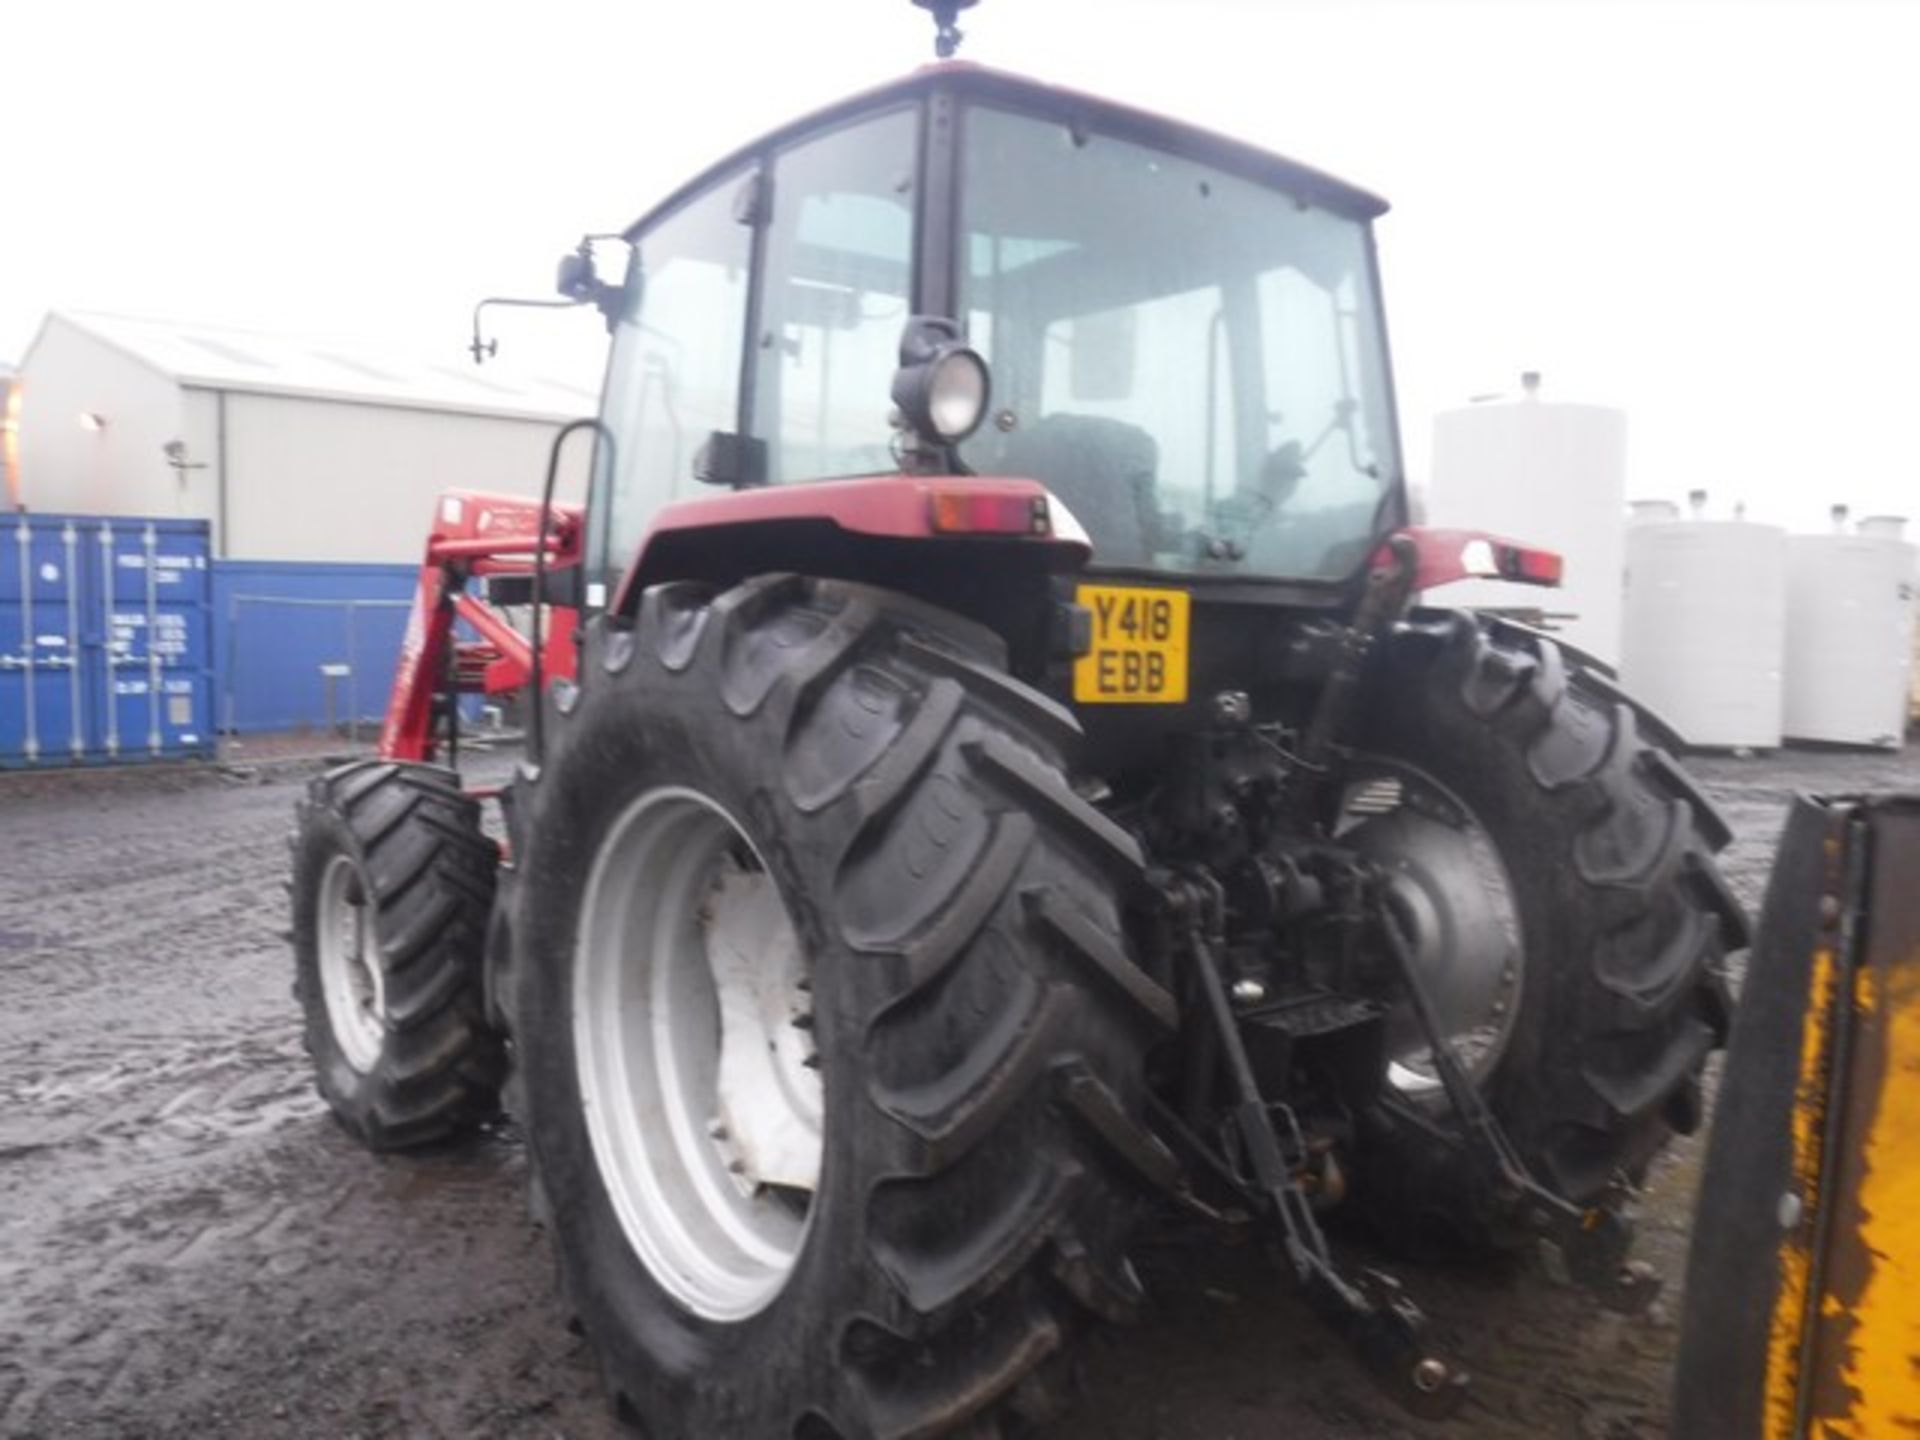 CASE CX90 TRACTOR C/W LOADER 6646 hrs (NOT VERIFIED) YEAR 2000 REG - Y418EBB SERIAL NO - JKJ246353 - Image 3 of 6